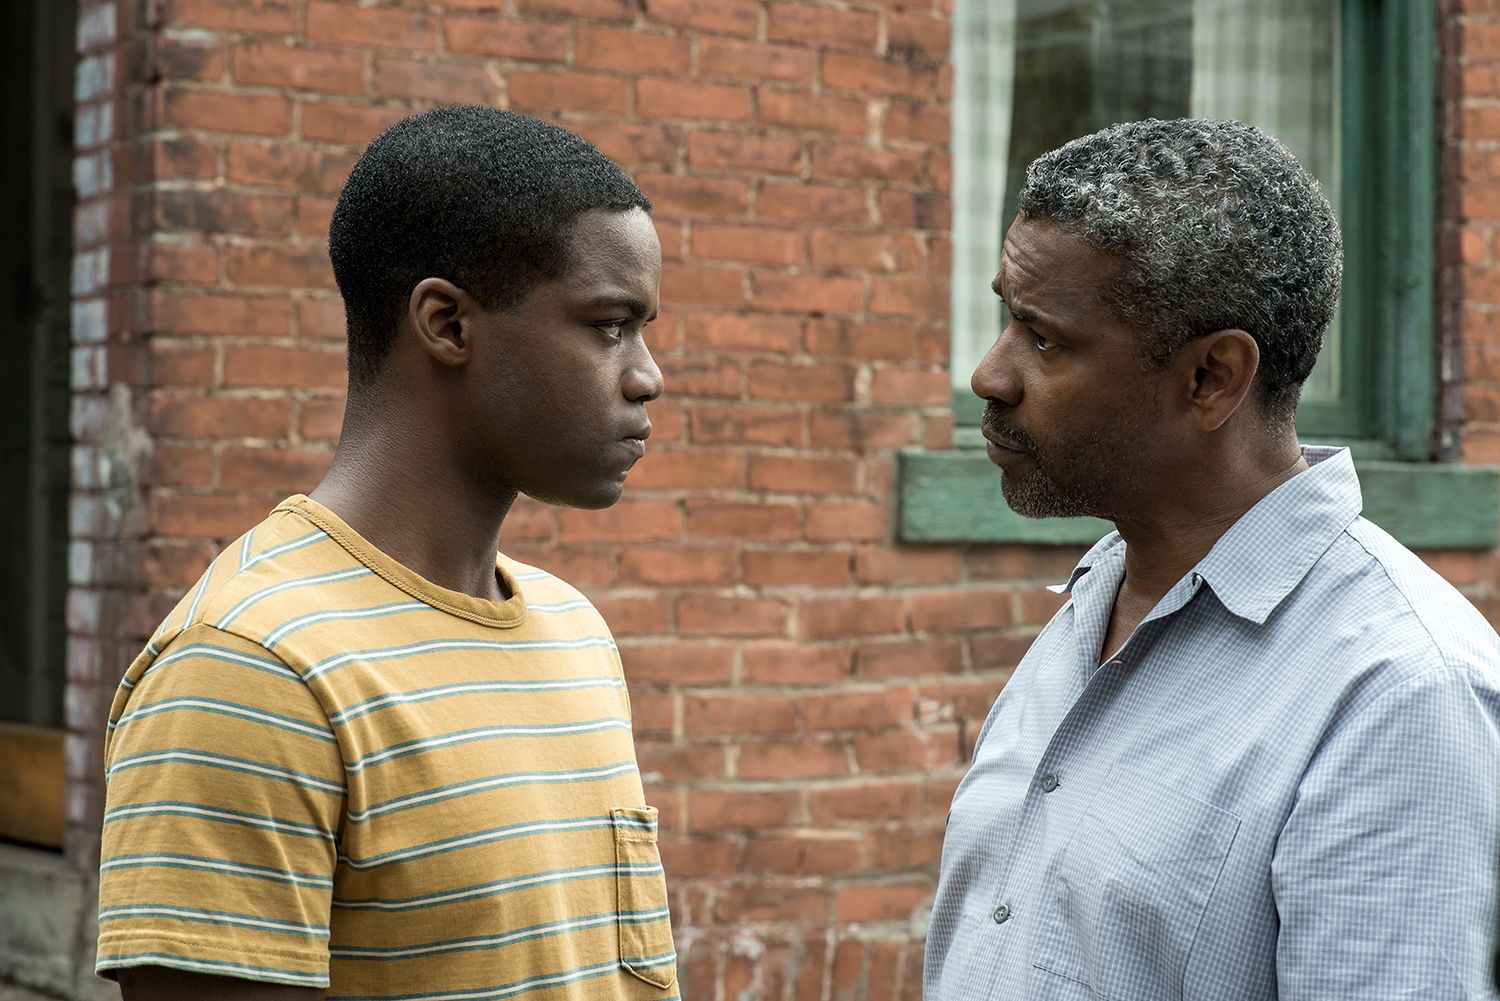 Meet Jovan Adepo, the Newcomer Denzel Washington Hand-Picked for His Latest Film